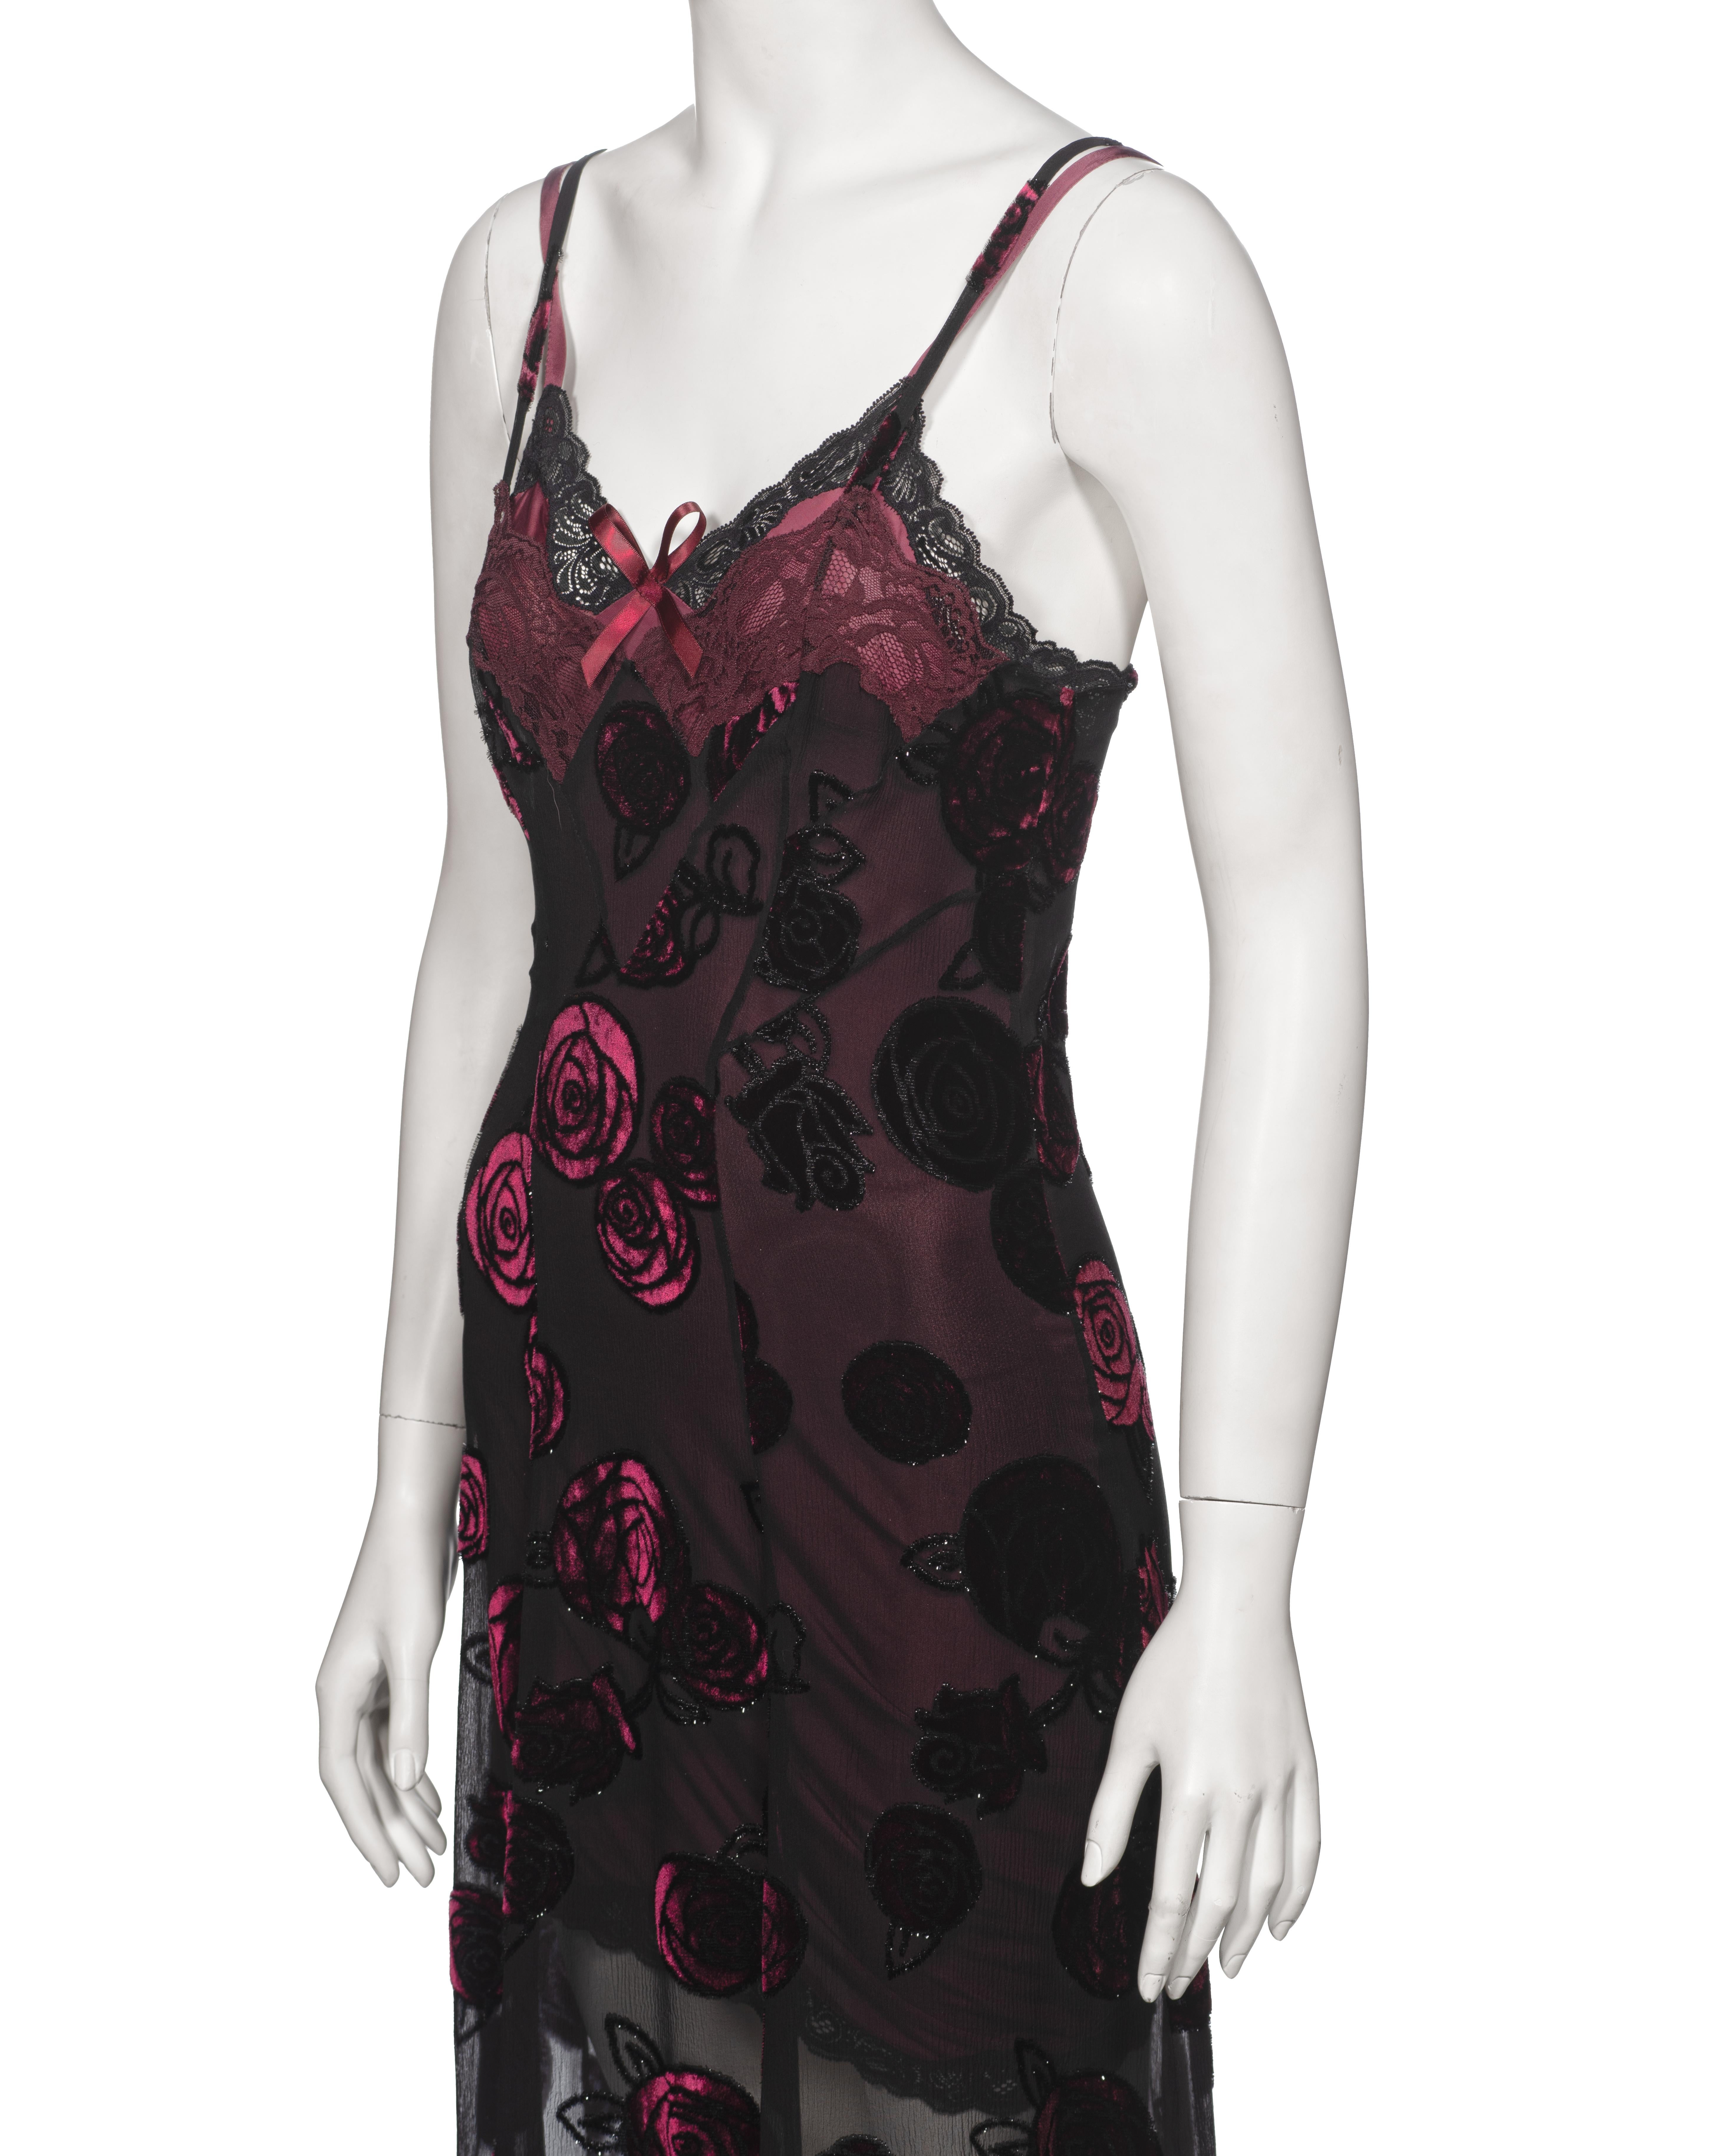 Christian Dior by John Galliano Double Layered Bordeaux Slip Dress, FW 2005 For Sale 8